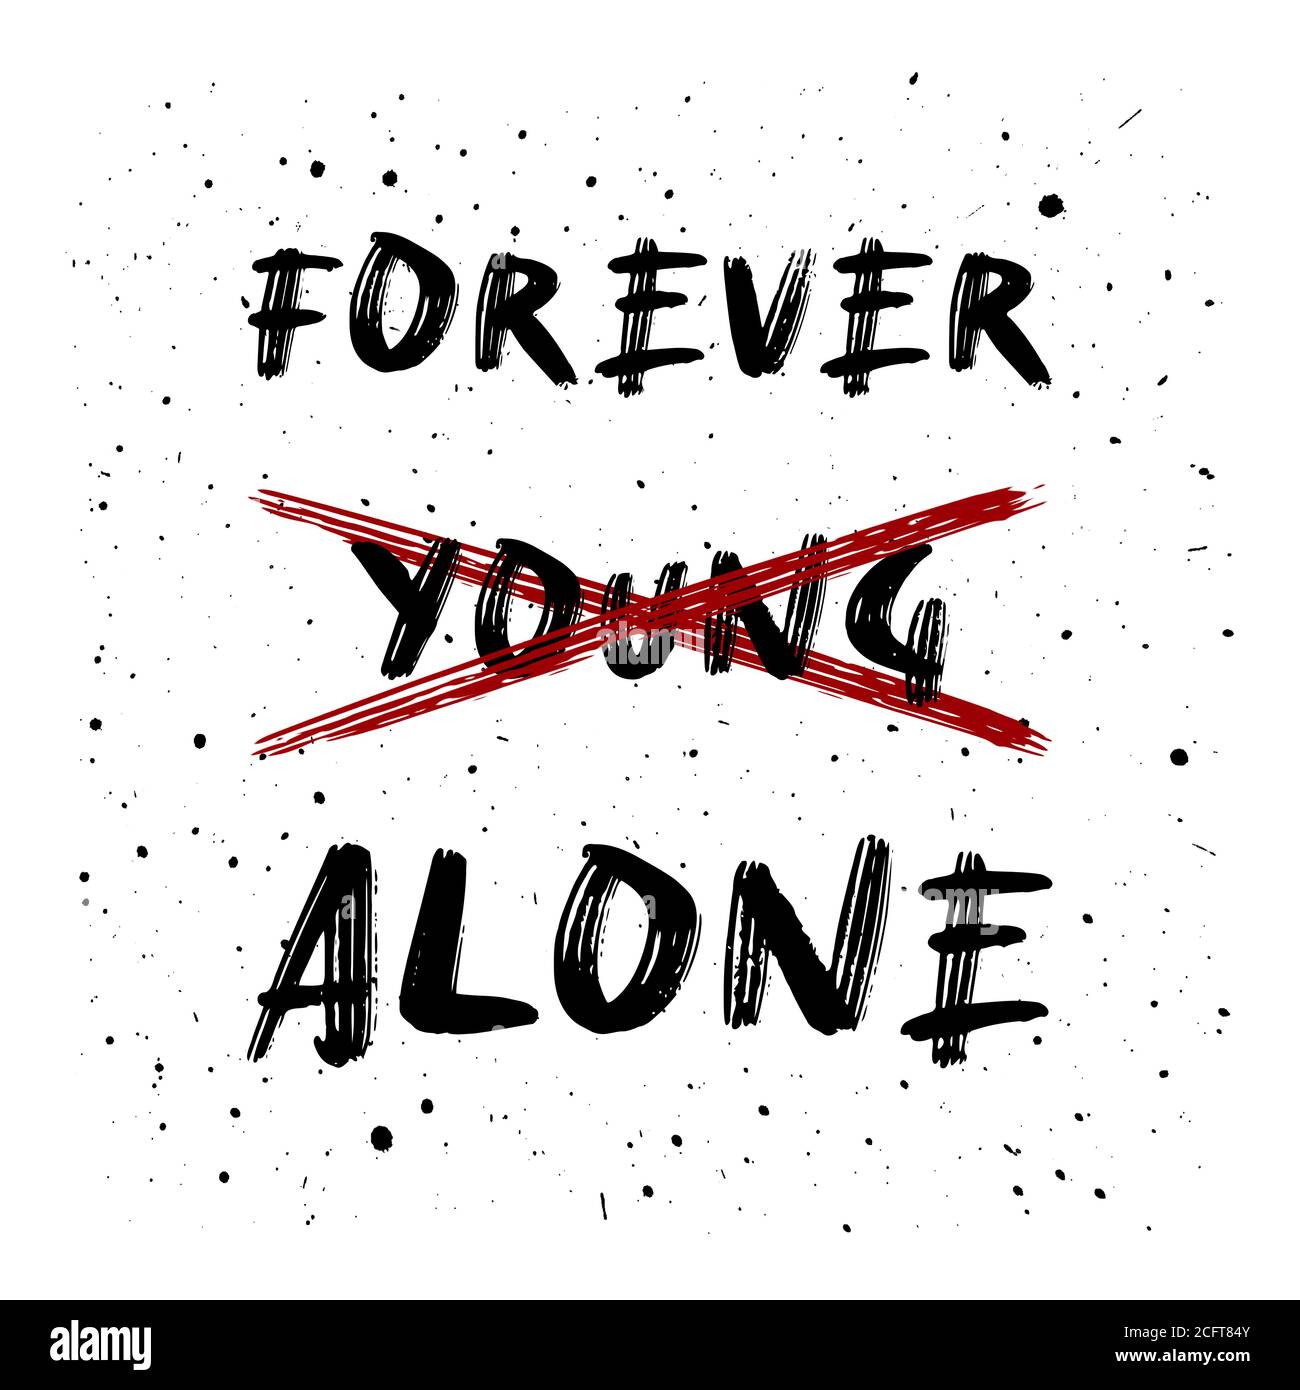 Not young anymore. Forever alone, funny text art design for printing. Minimalist lettering composition. Trendy humor typography illustration. Stock Photo